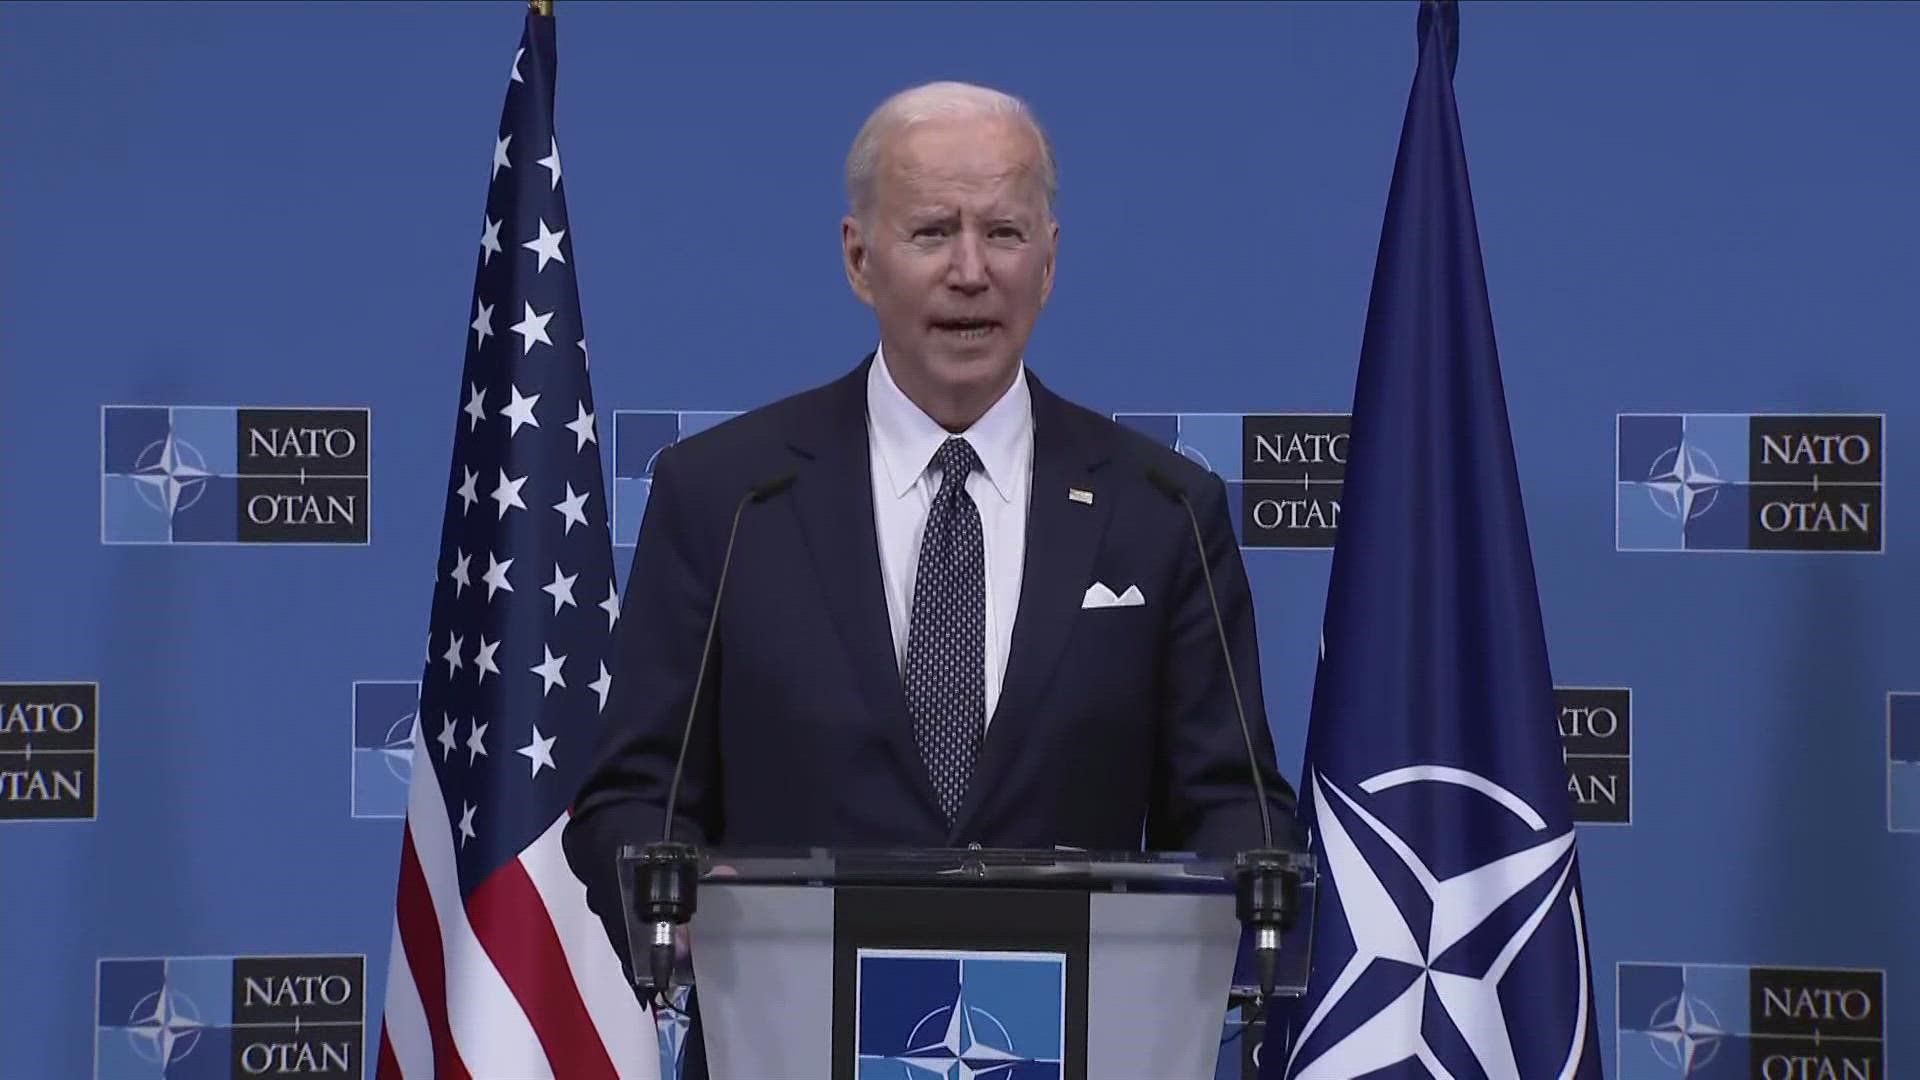 After a NATO summit, President Biden announced the U.S. will broaden its sanctions on Russia and admit 100,000 Ukrainian refugees.